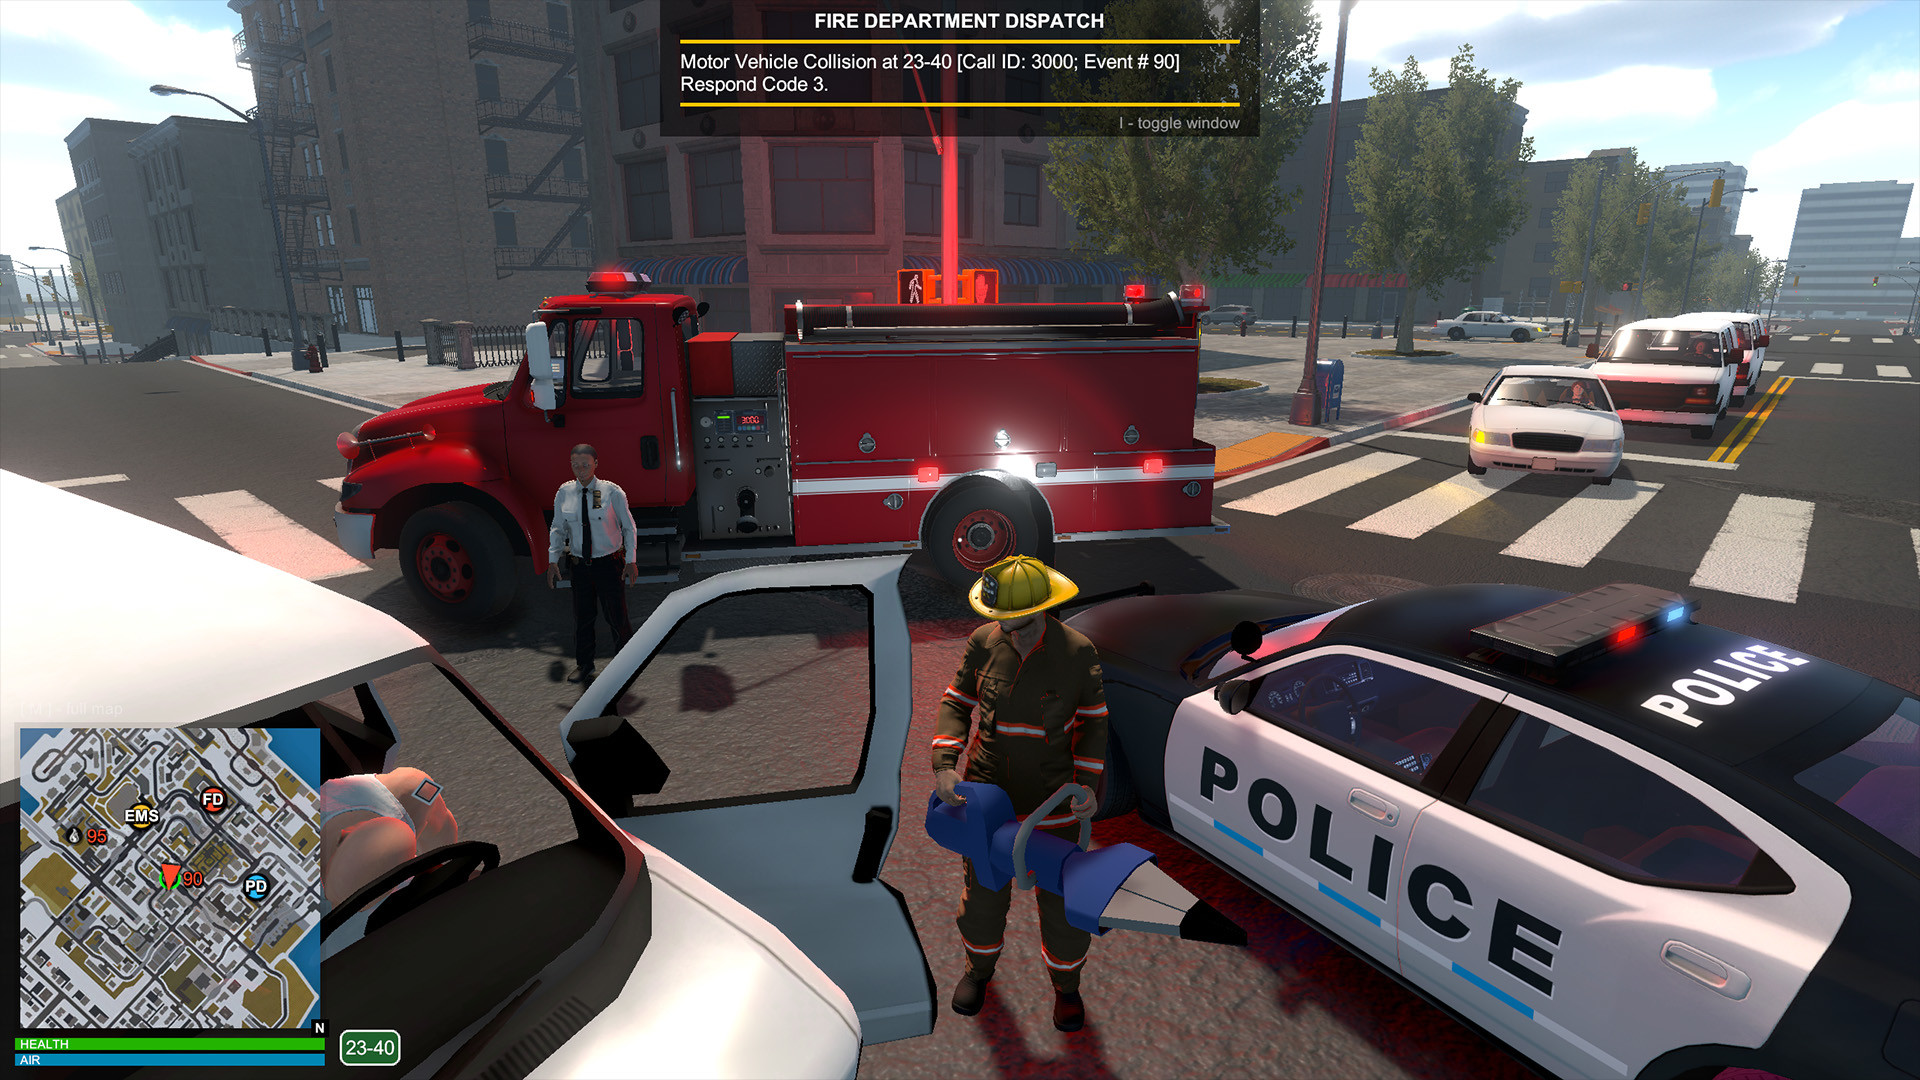 Save 40% on Flashing Lights - Police, Firefighting, Emergency Services  Simulator on Steam